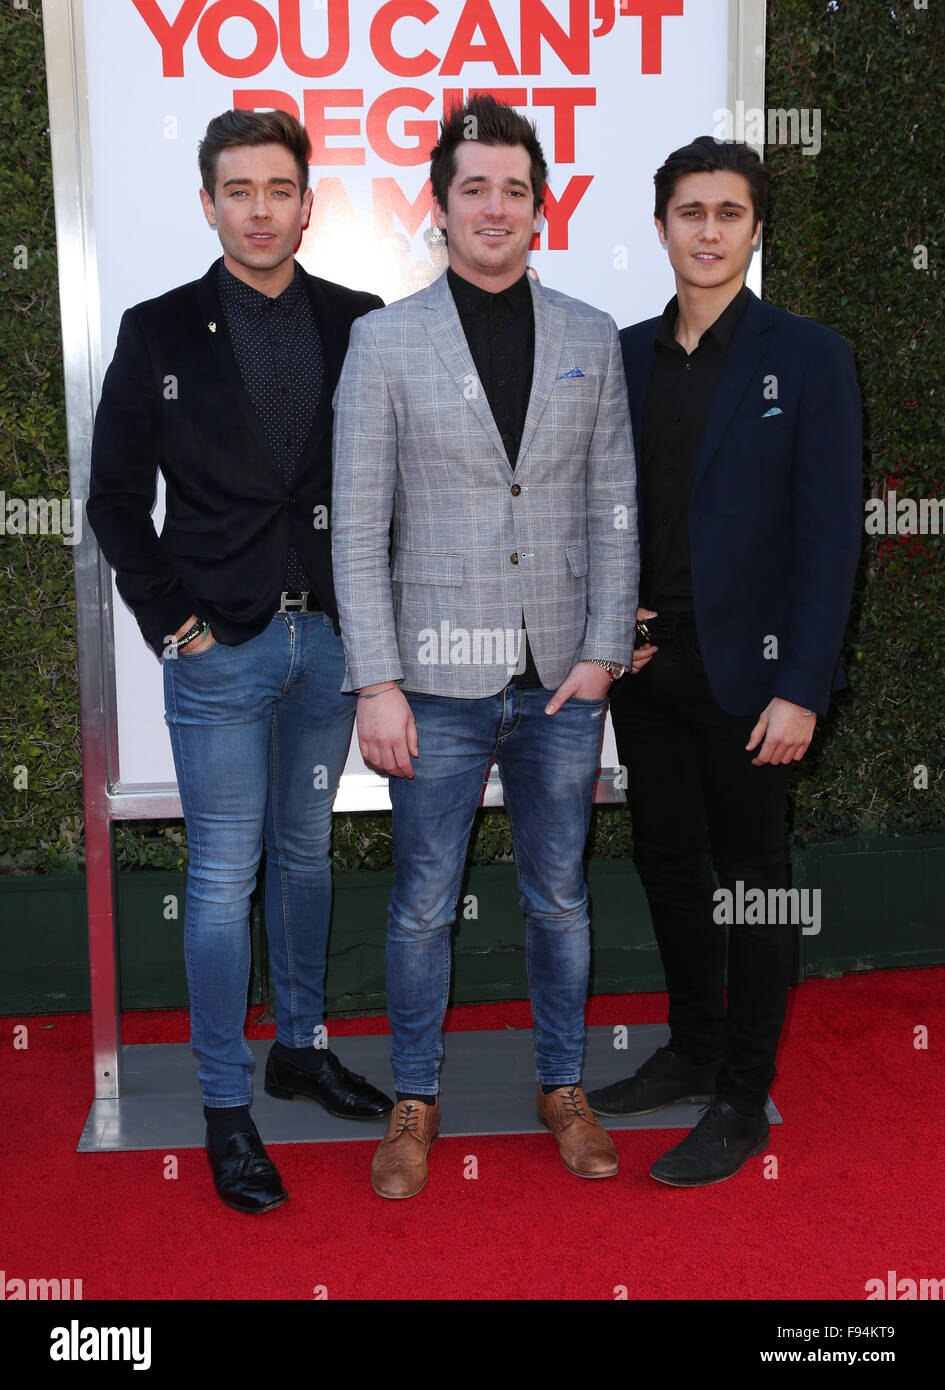 Premiere Of CBS Films' 'Love The Coopers'  Featuring: Aleksey Lopez, Kristopher James, Kyle Carpenter Where: Los Angeles, California, United States When: 12 Nov 2015 Stock Photo